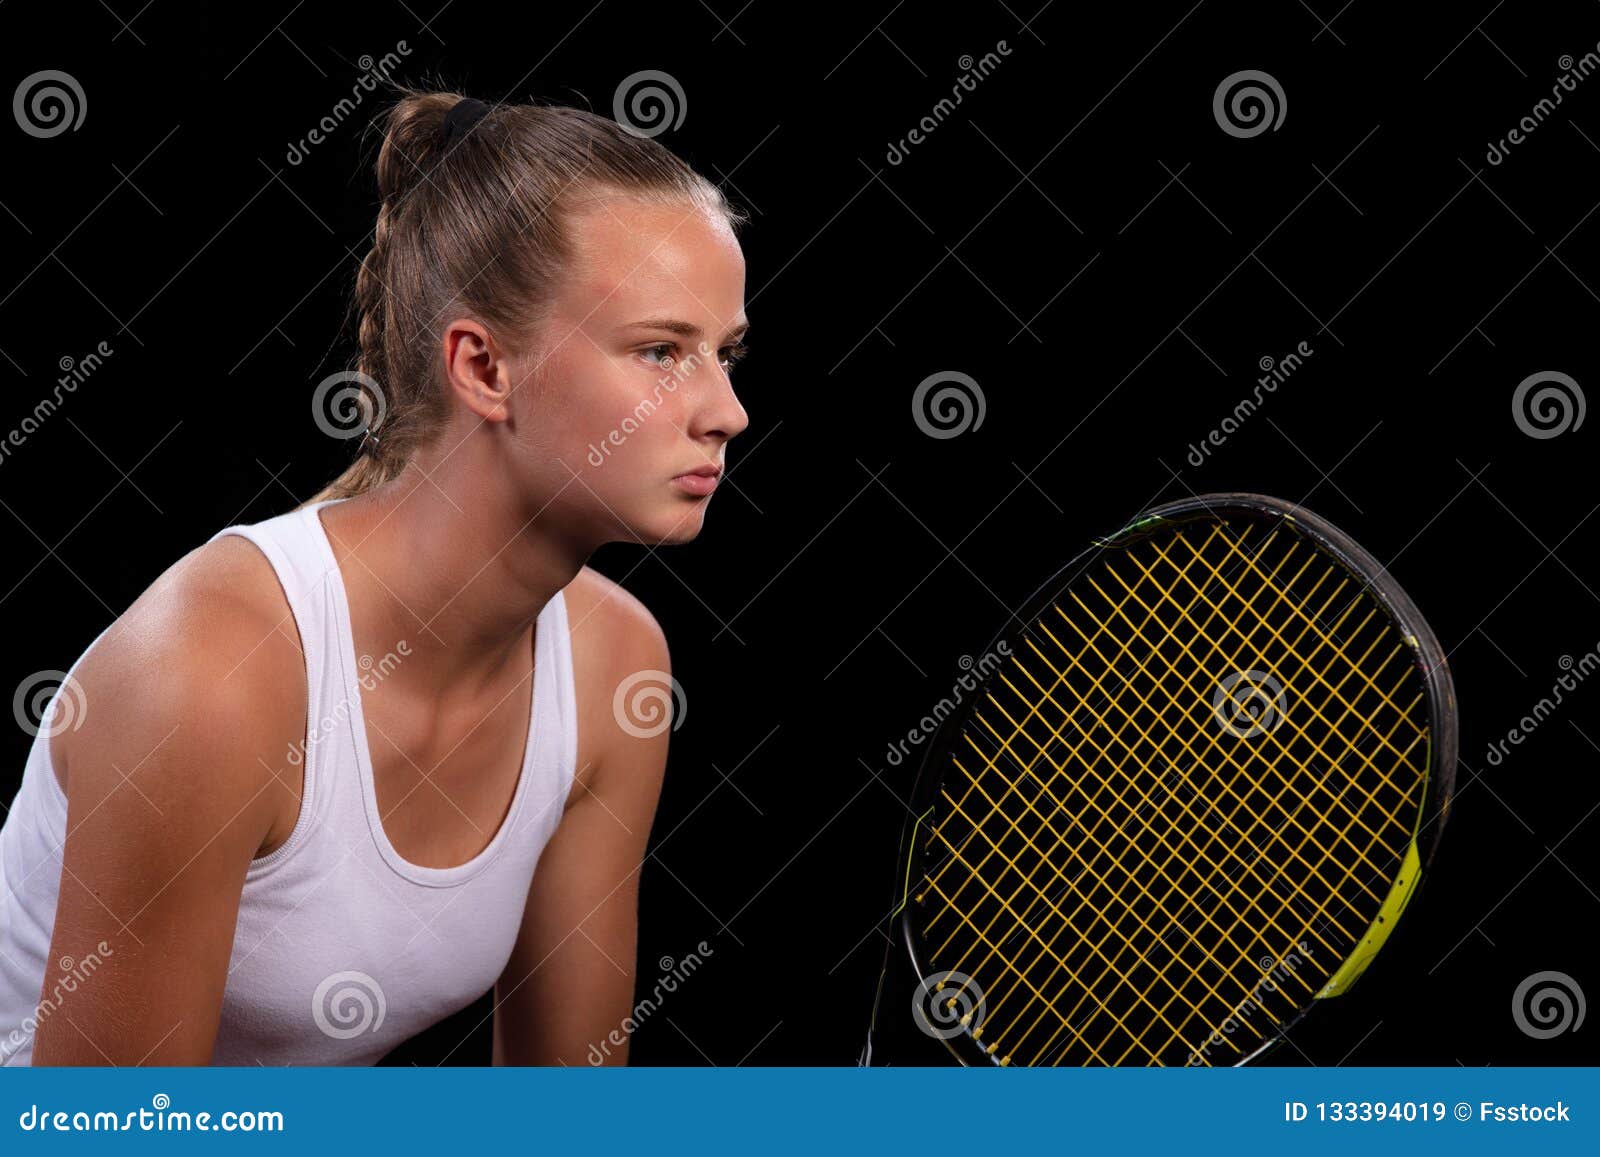 portrait of beautiful woman playing tennis indoor.  on black.